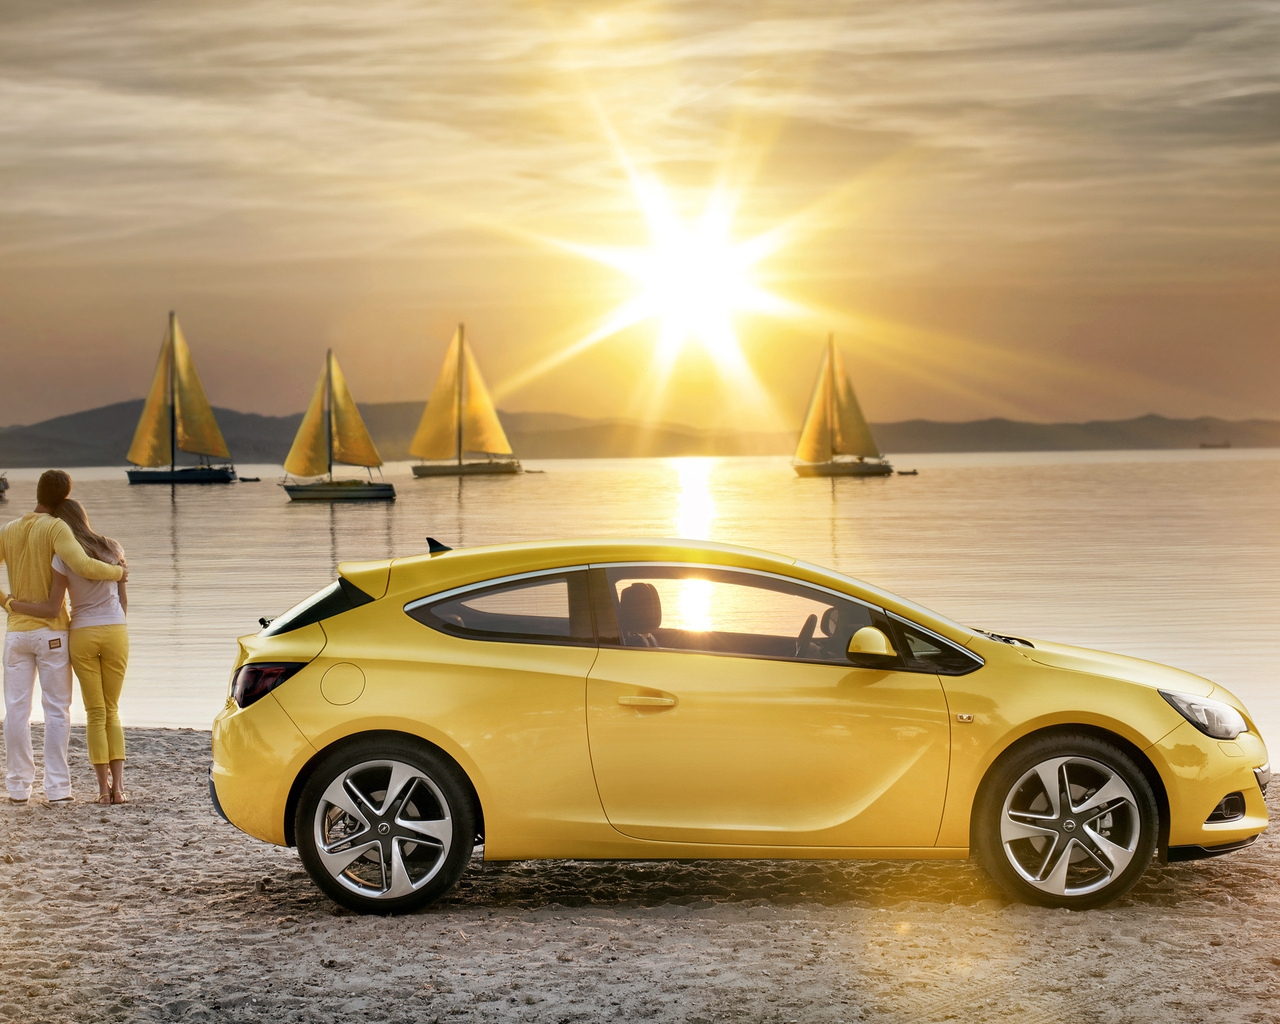 Opel Astra GTC for 1280 x 1024 resolution